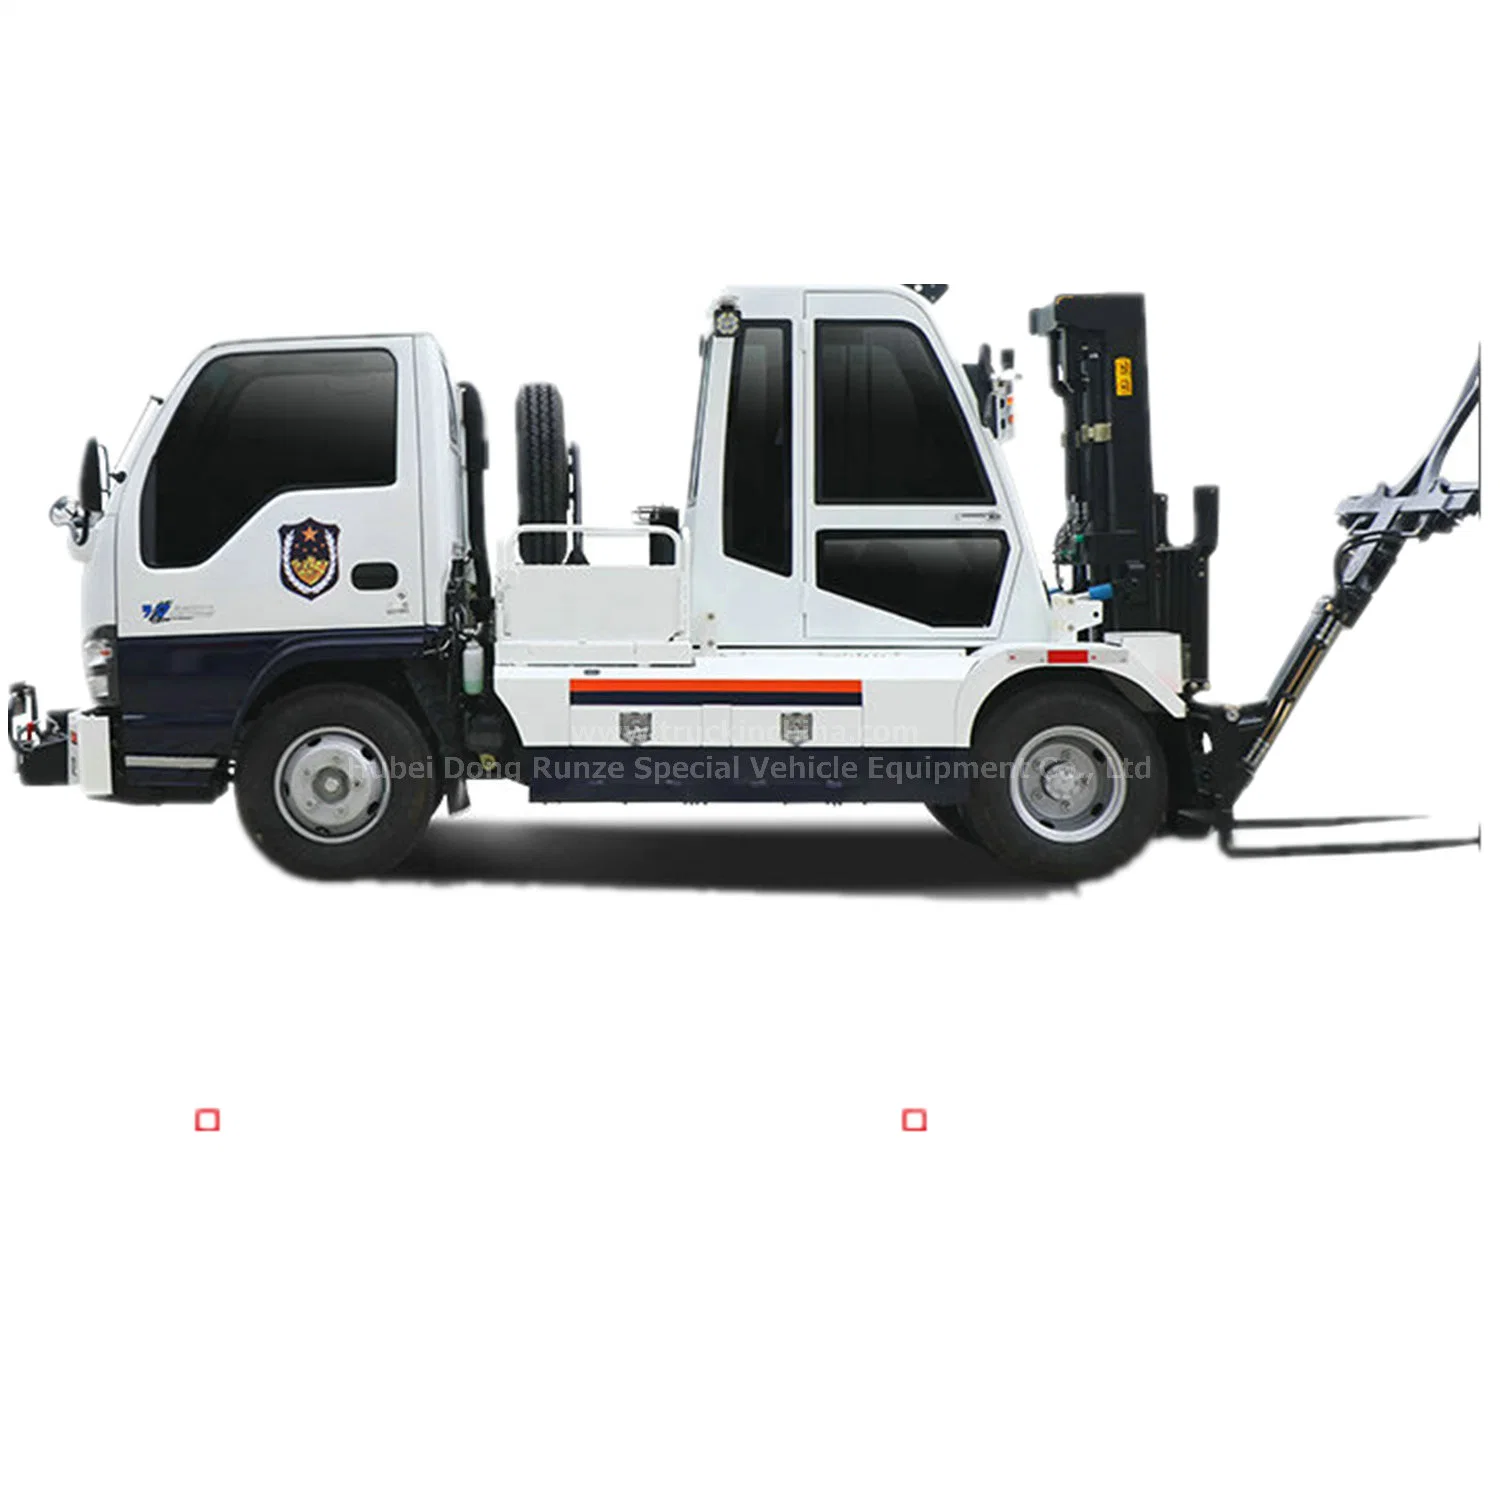 2.5ton Fork Forklift Tow Truck Lsuzu Towing 6-7ton with Front Electric Winch Rear Folding Bracket High Lifting Platform 7m